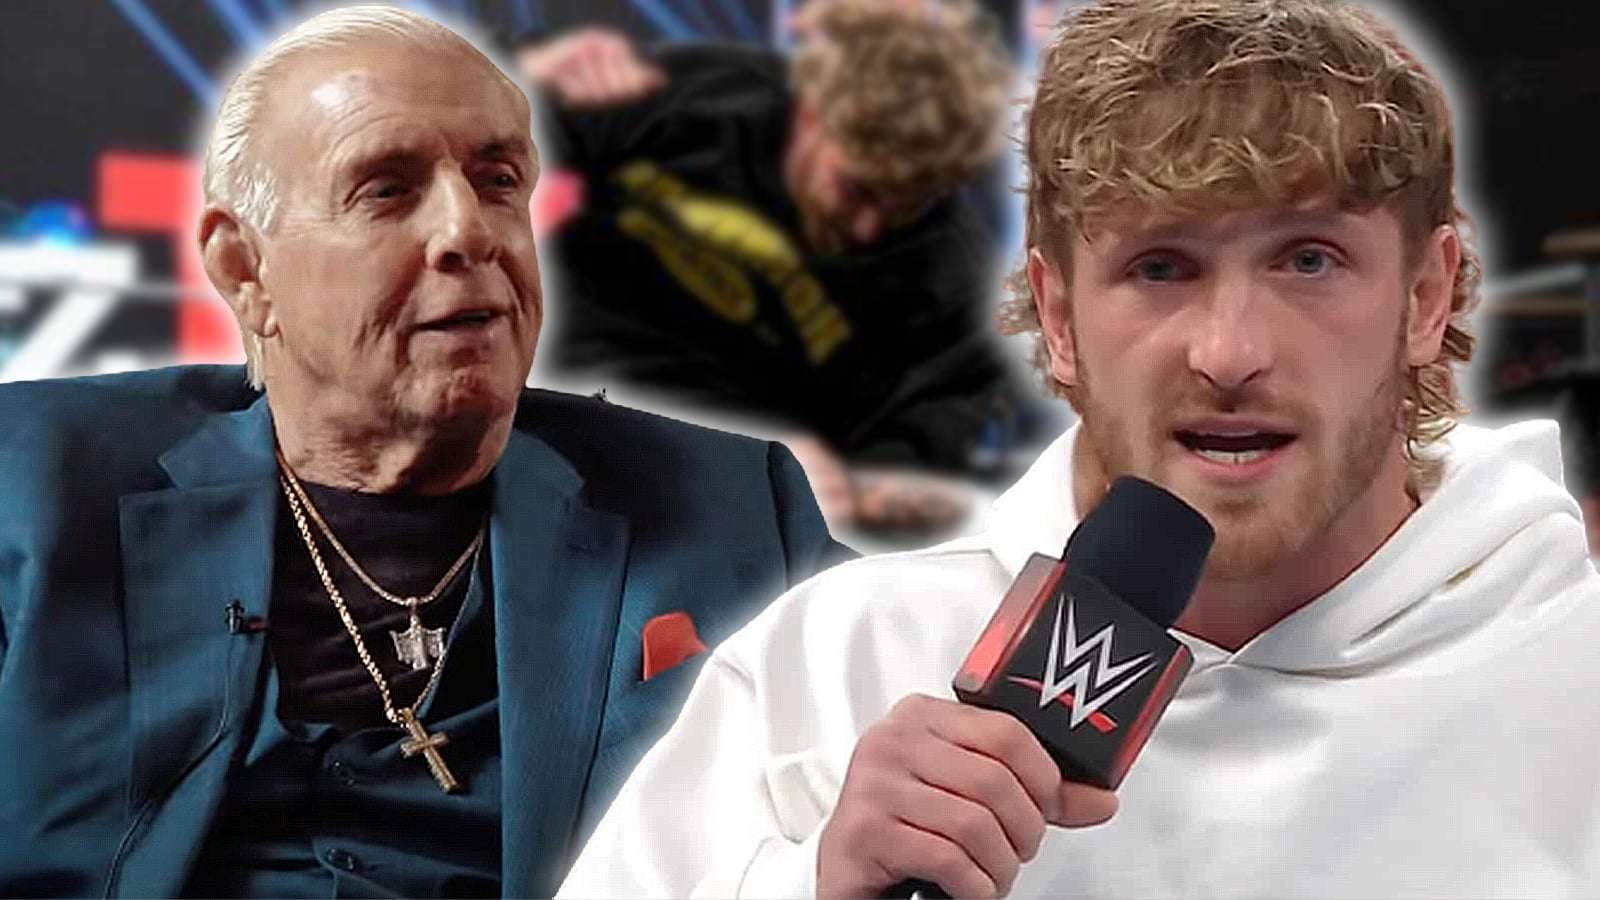 logan paul comments to ric flair about wwe